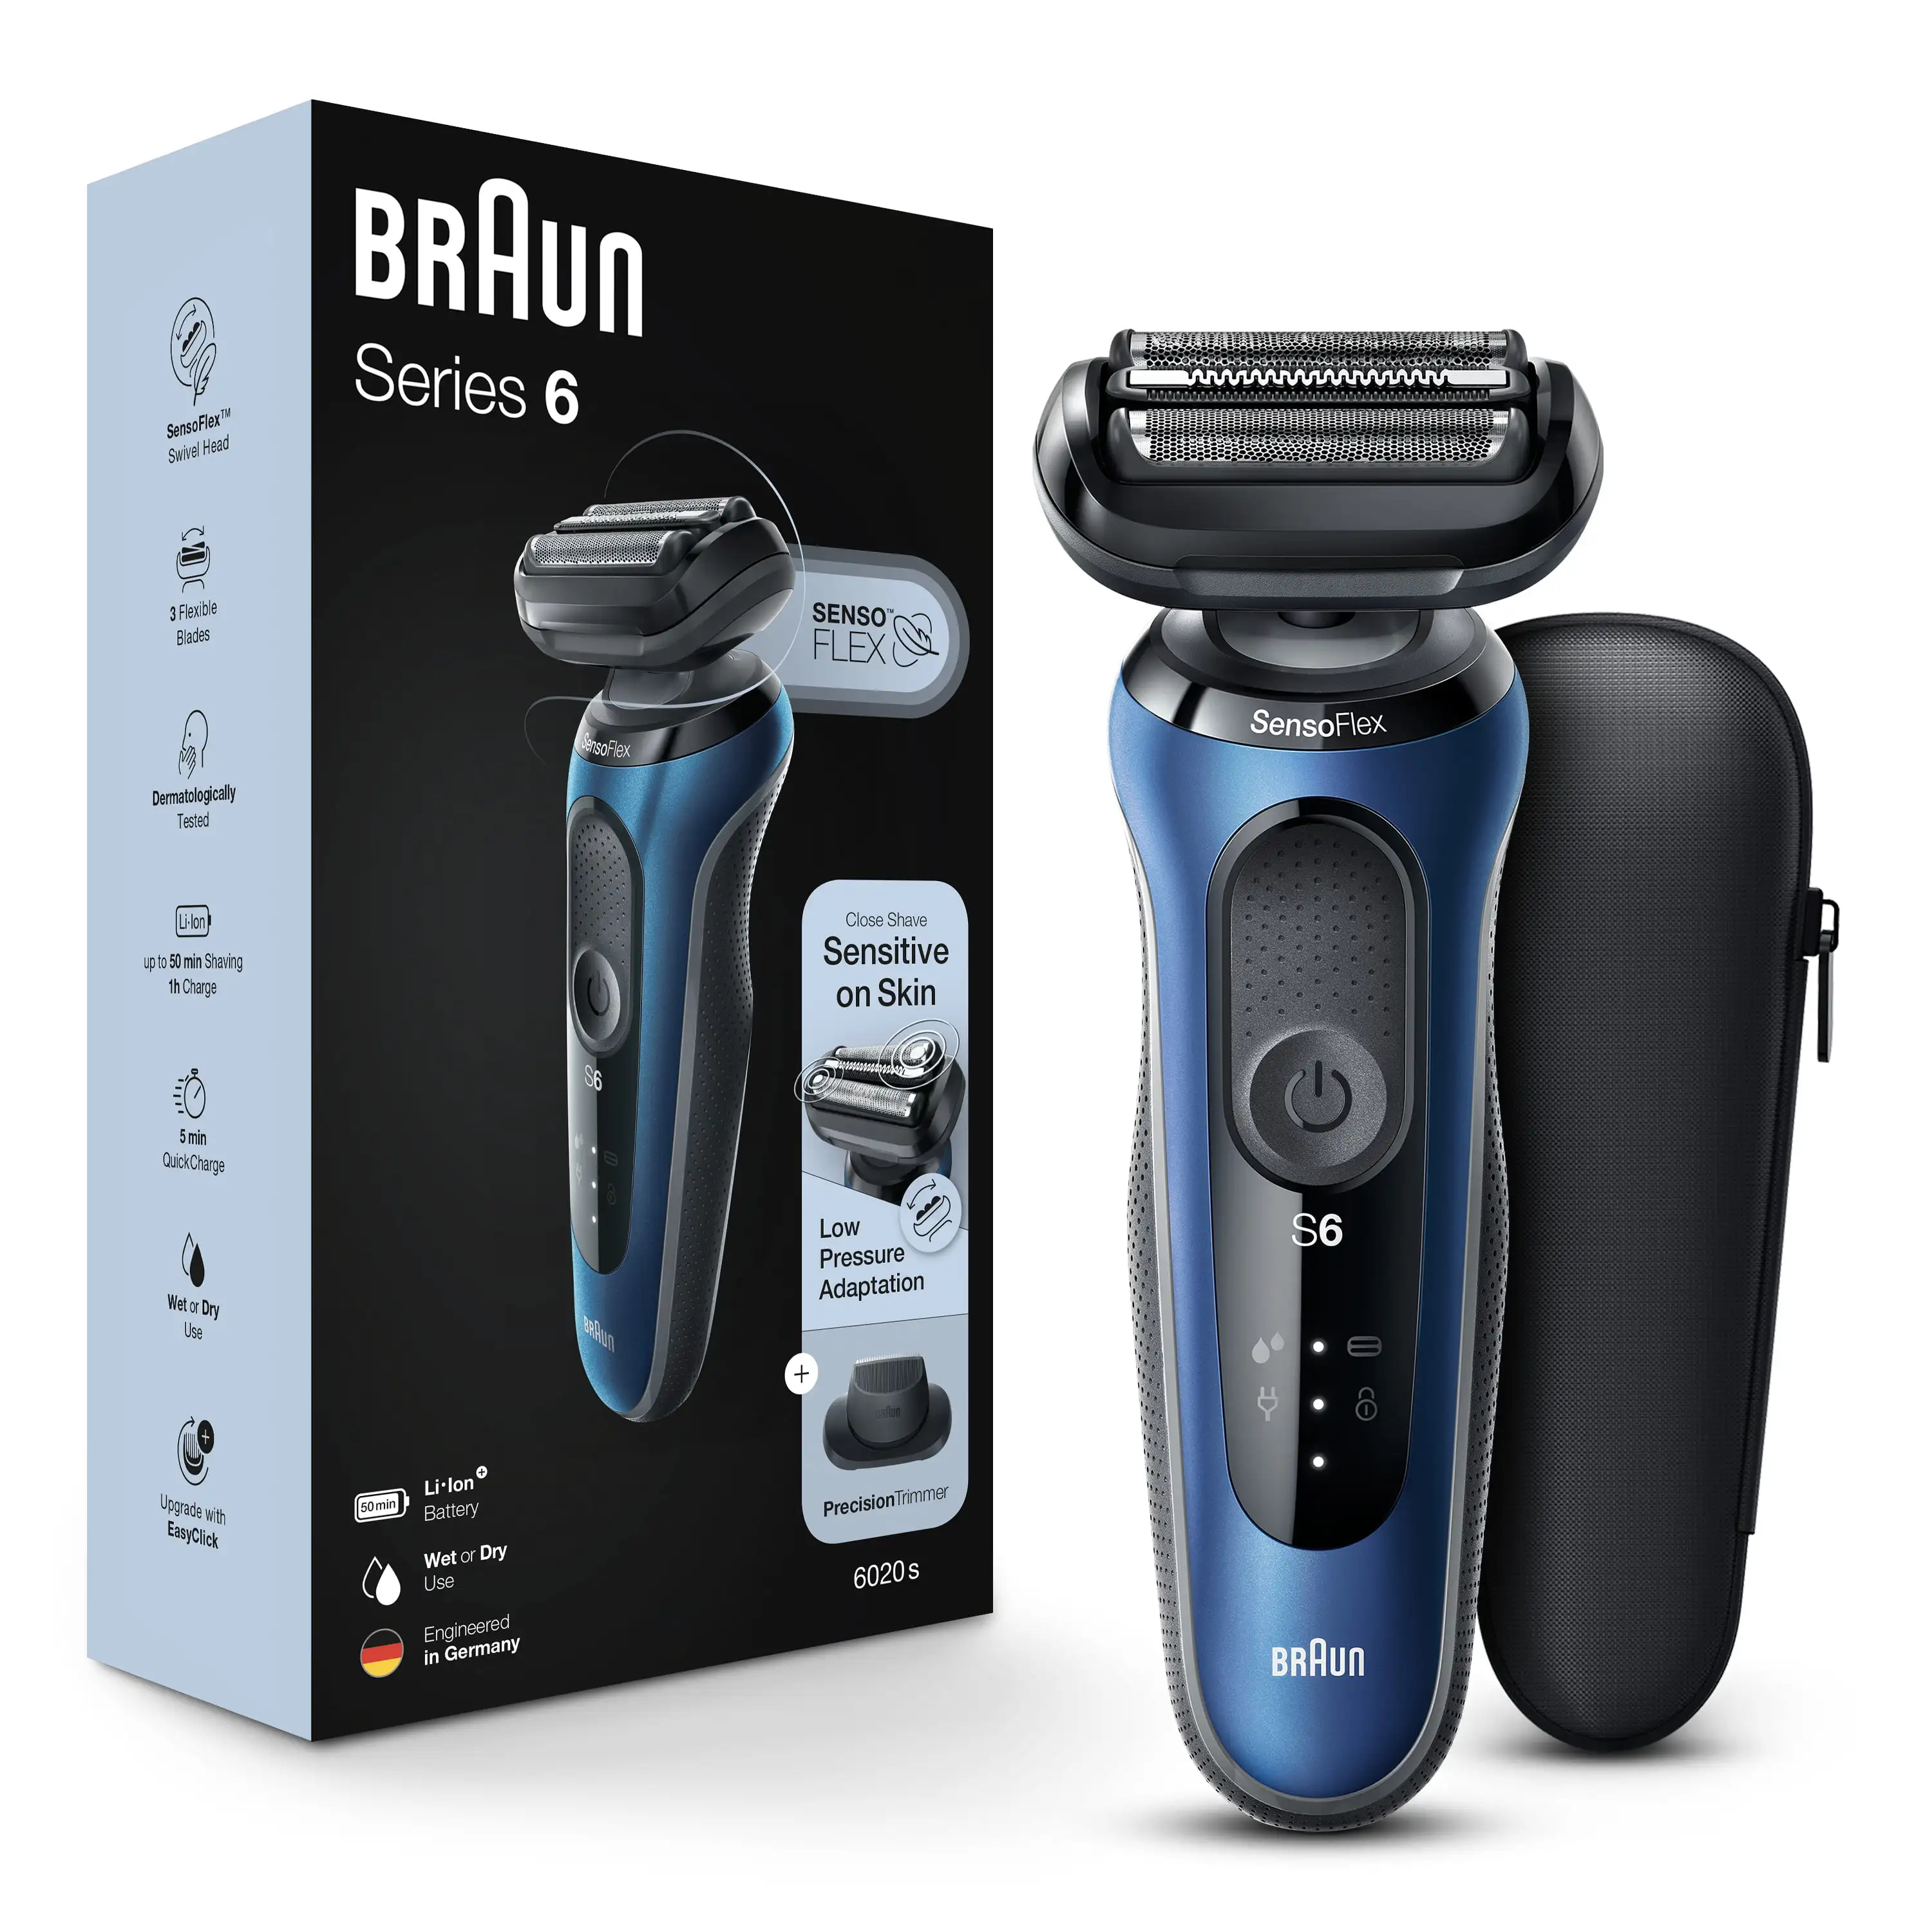 

Braun Series 6 6020s Electric Shaver with Precision Trimmer for Men, Wet & Dry, Rechargeable, Cordless Foil Shaver, Blue